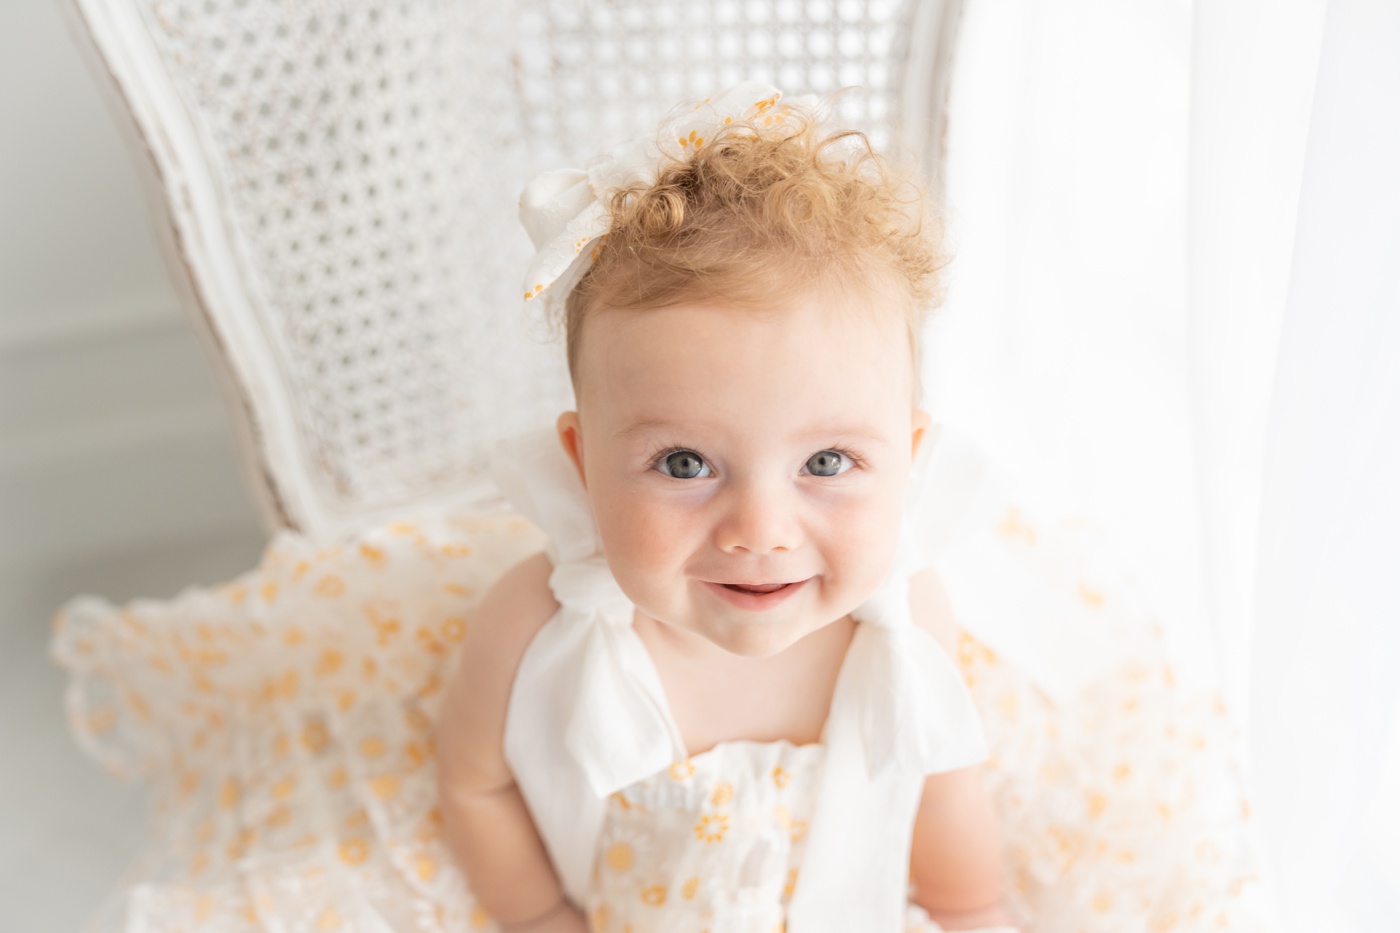 Baby girl sitting on an antique white chair in a white fluffy dress with yellow daisies